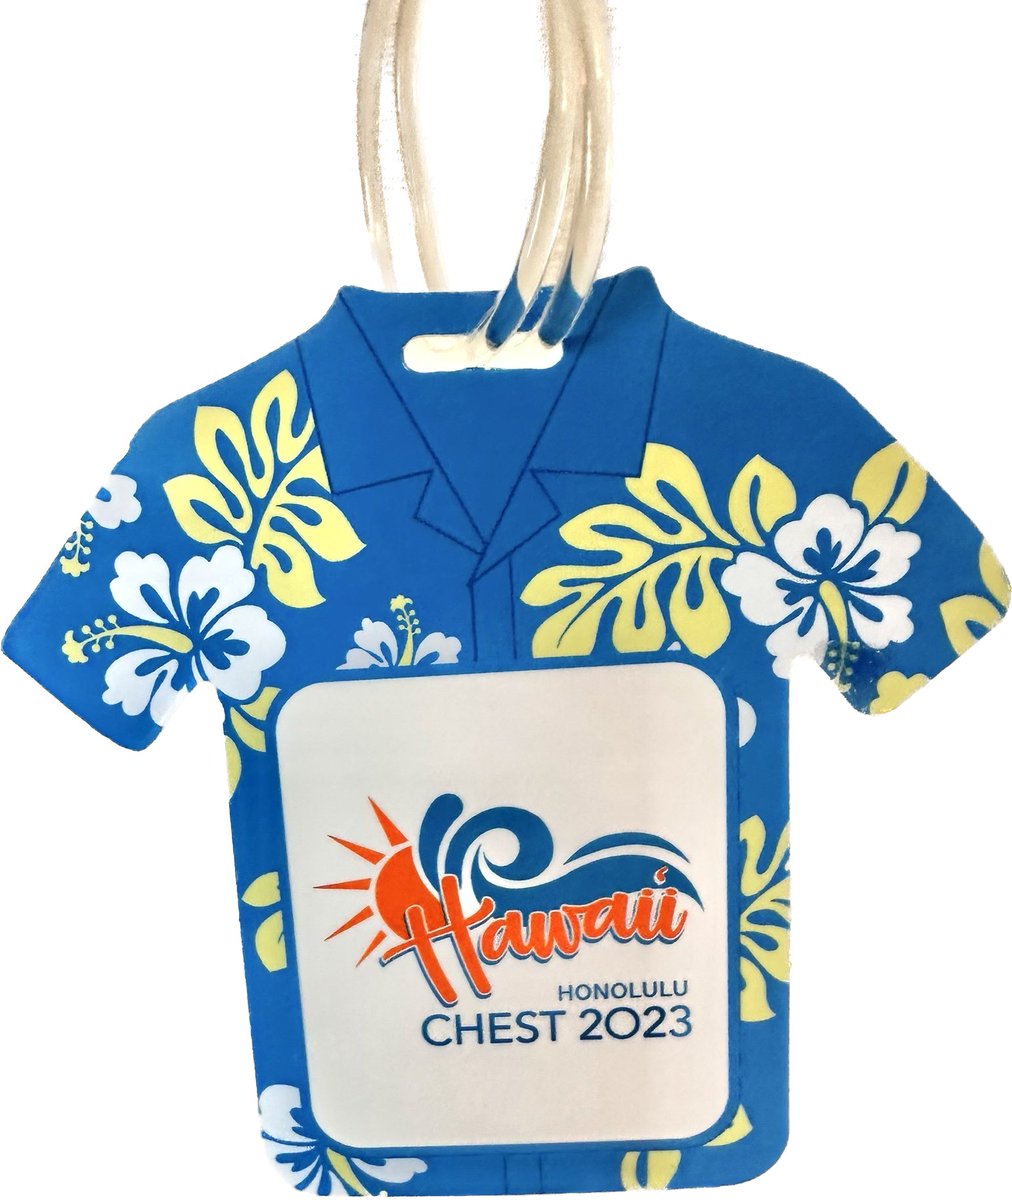 Dear #CHESTTrainee, are you ready for #CHEST2023. ? Look at this year Trainee Track! A great collection of sessions and activities during the meeting aimed for our talented young trainees! See you this weekend in Hawaii #Aloha #Mahalo chestnet.org/Learning-and-E…